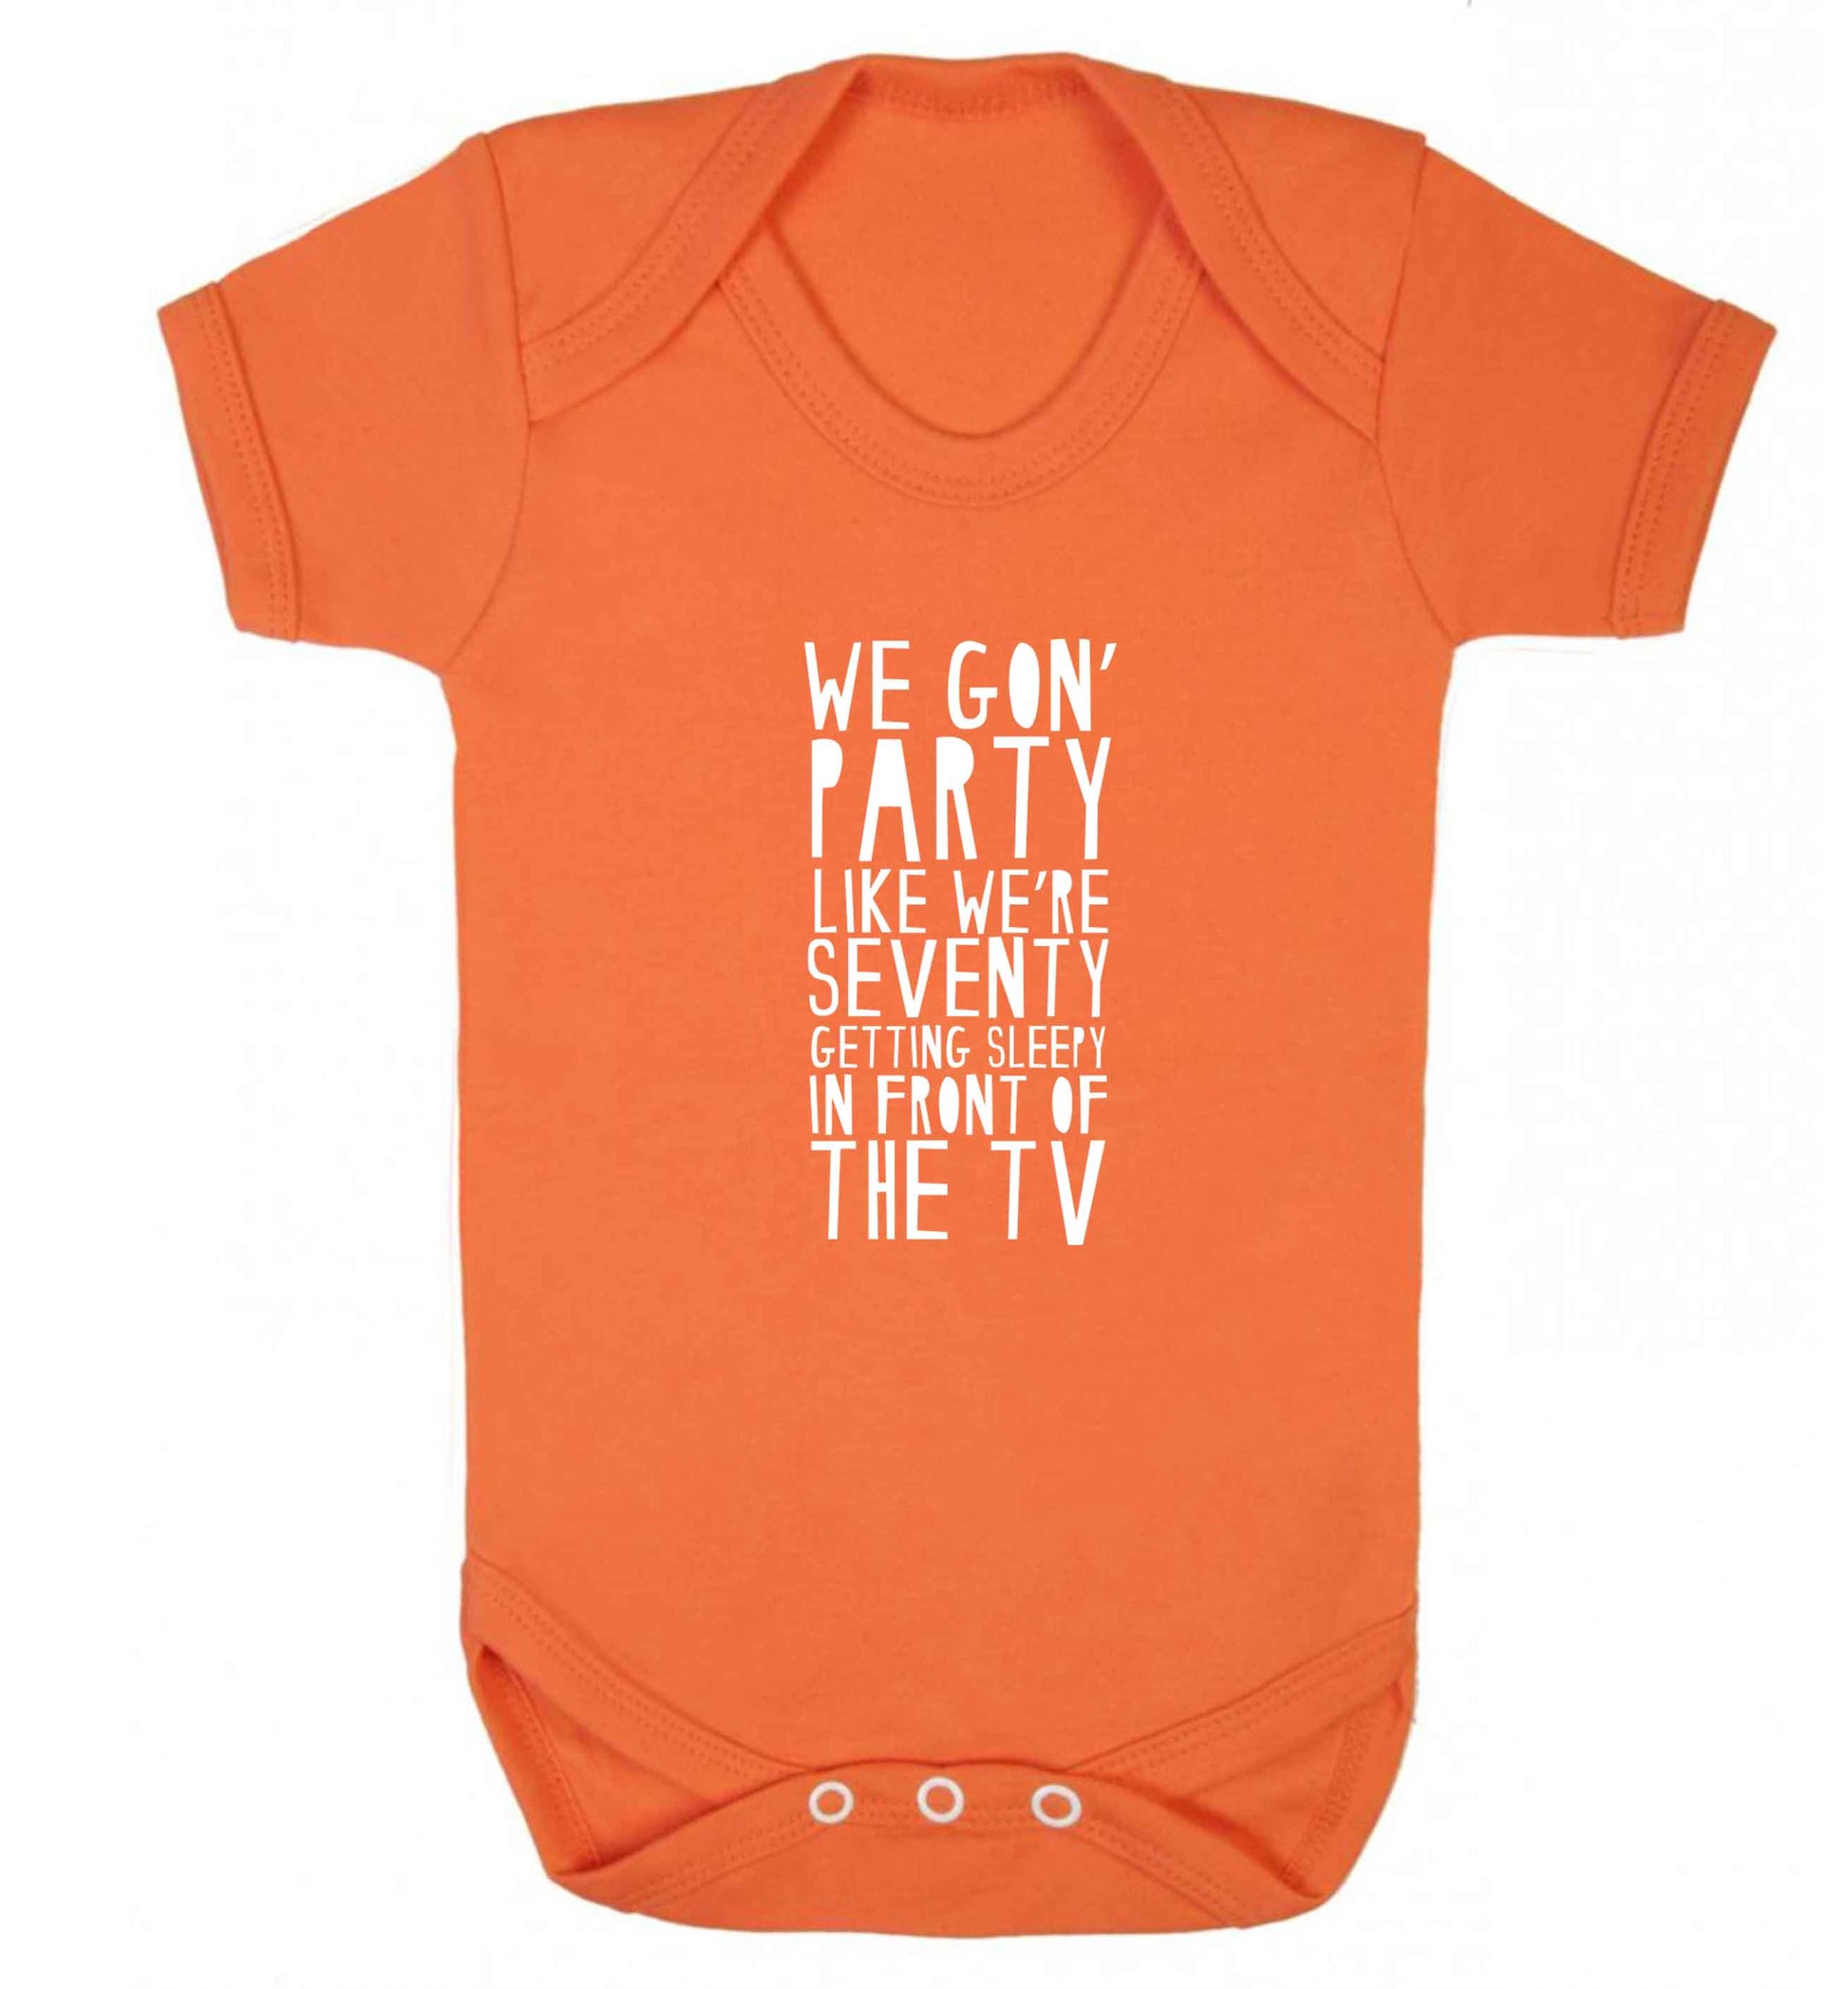 We gon' party like we're seventy getting sleepy in front of the TV baby vest orange 18-24 months